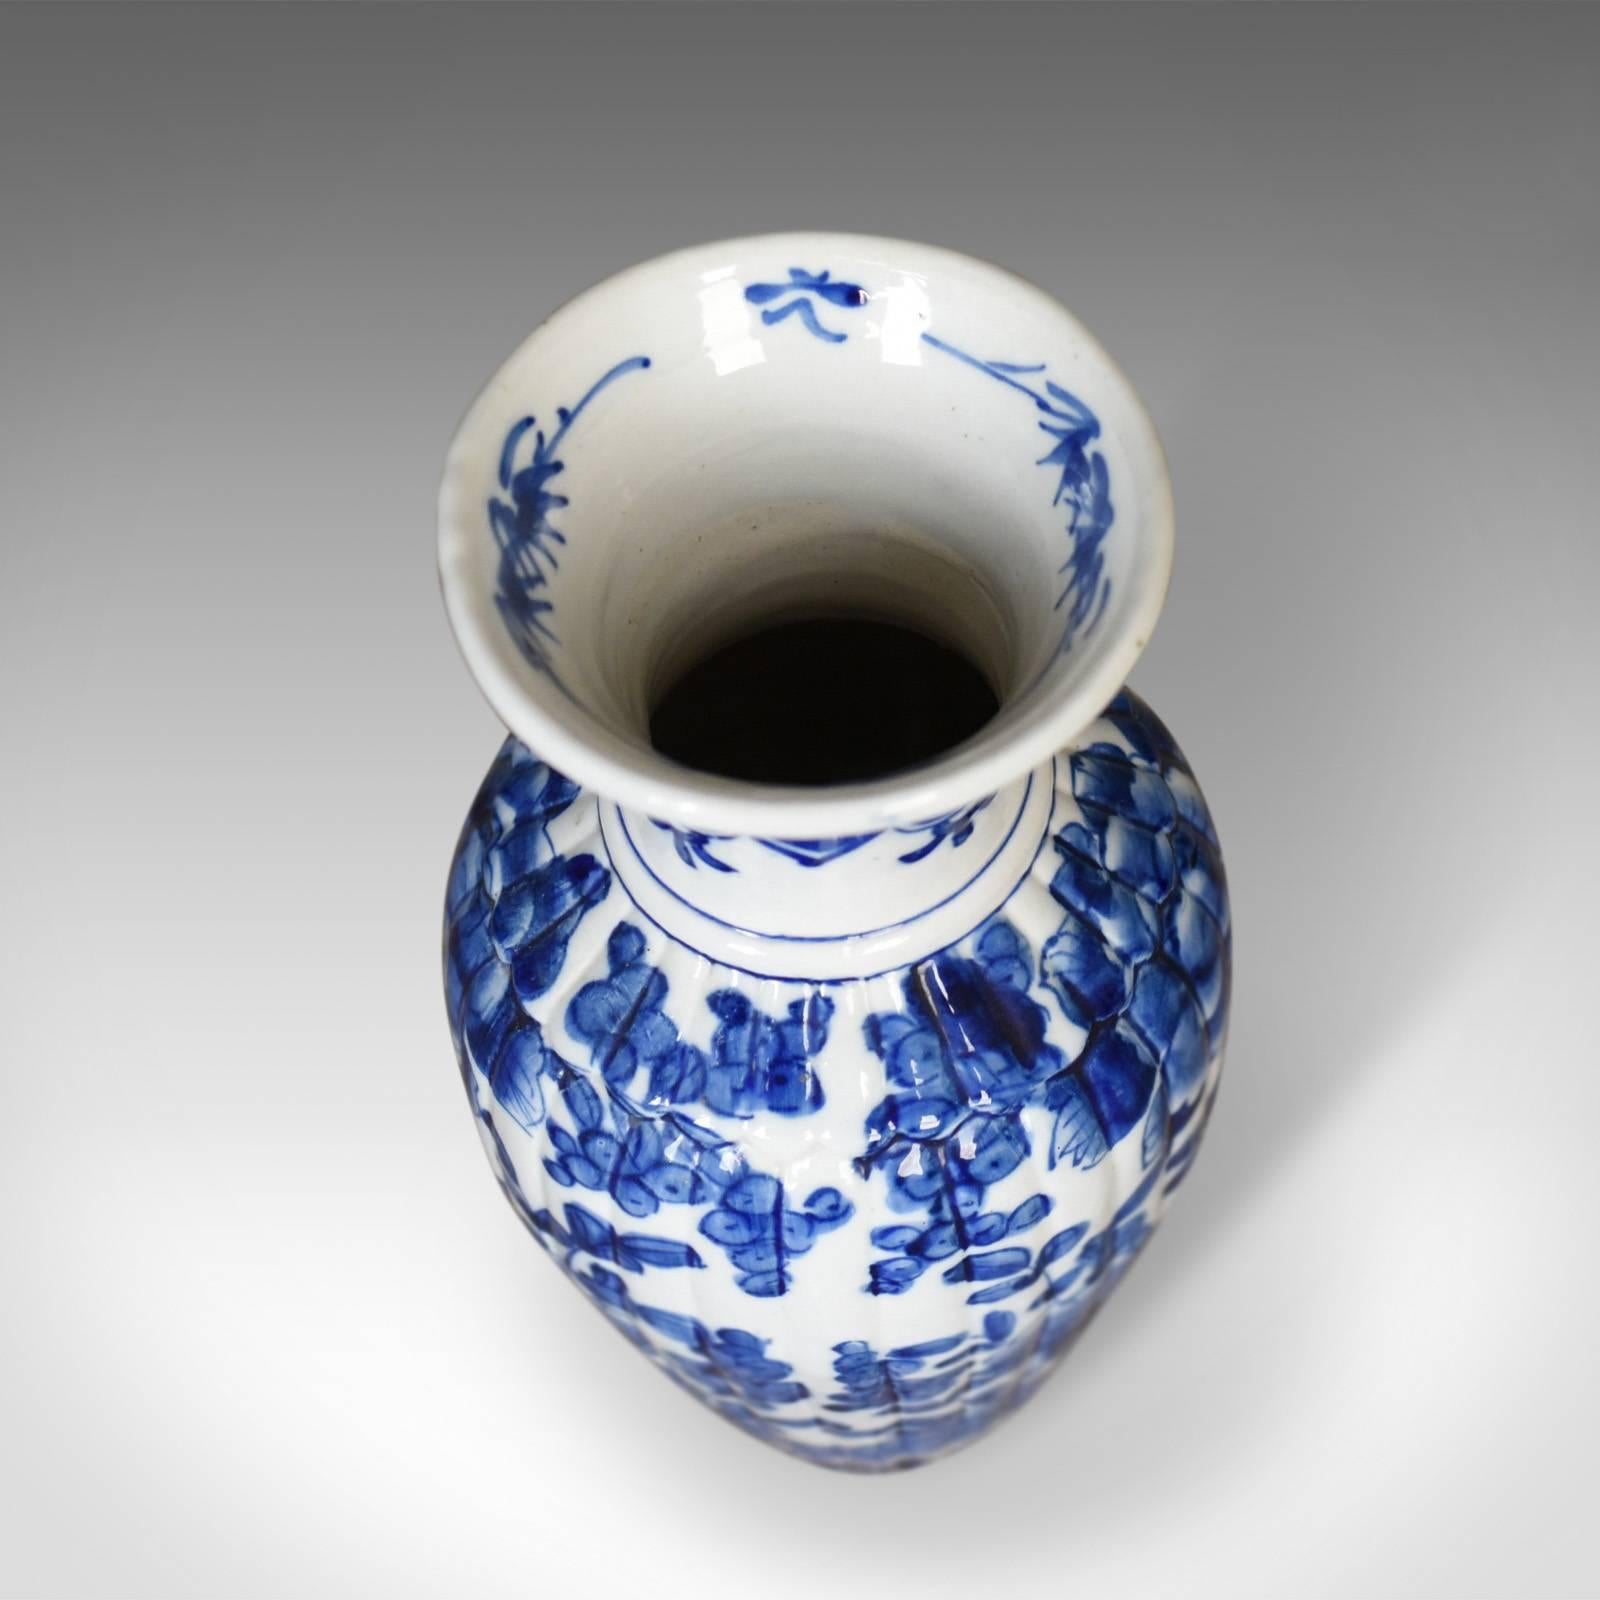 This is a blue and white, Chinese flower vase, a ceramic piece dating to the mid-late 20th century.

Of classic form with reeded bowl
In good condition throughout, free from damage
Unmarked base displays some age.

Blue and white floral and